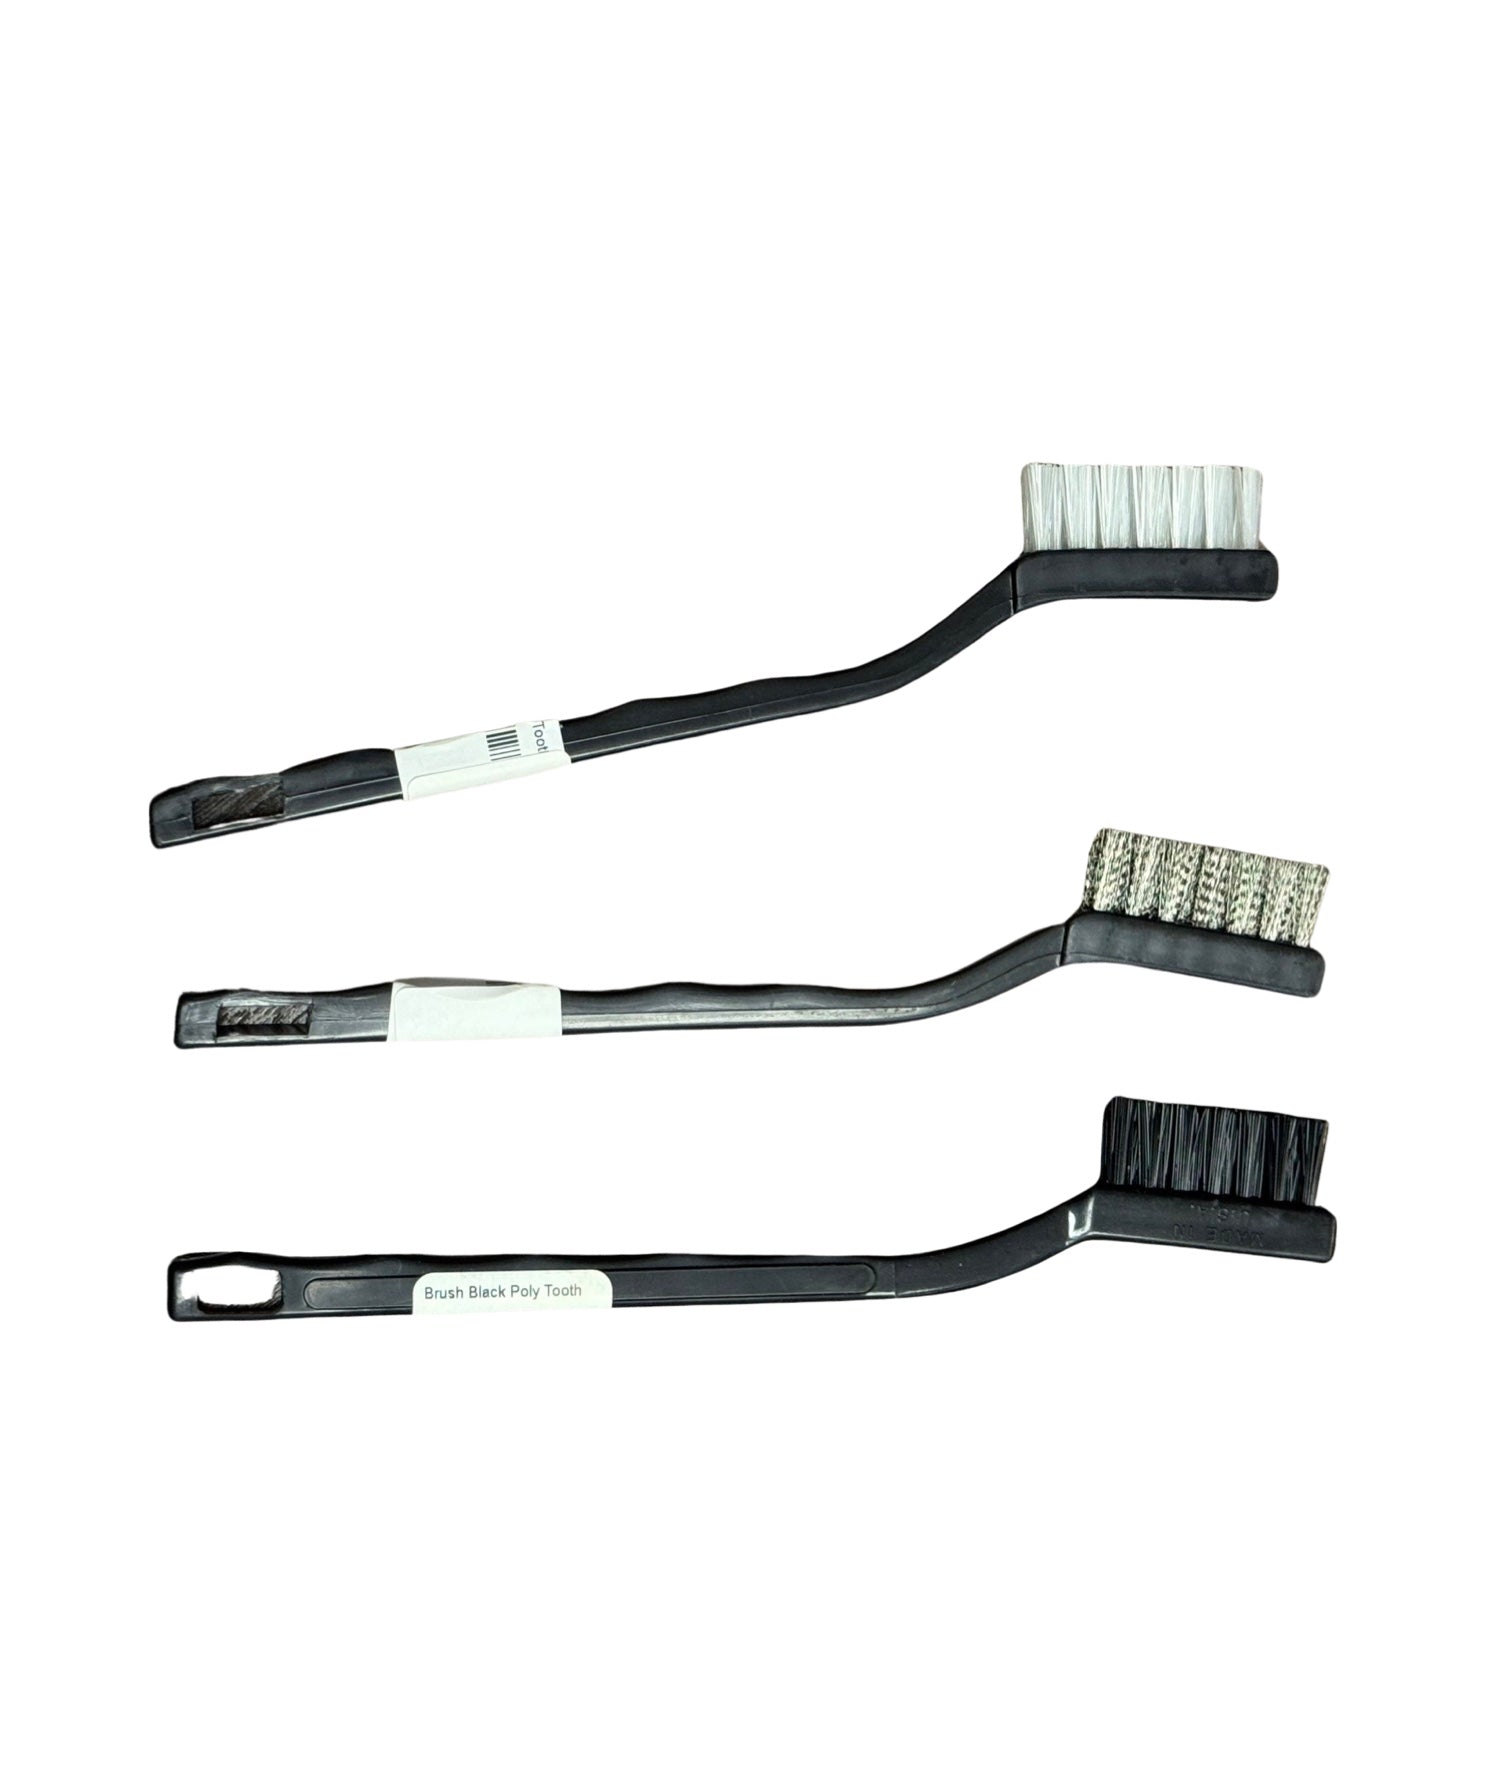 Toothbrushes  in Black Poly, White Nylon or Stainless-Steel Bristles